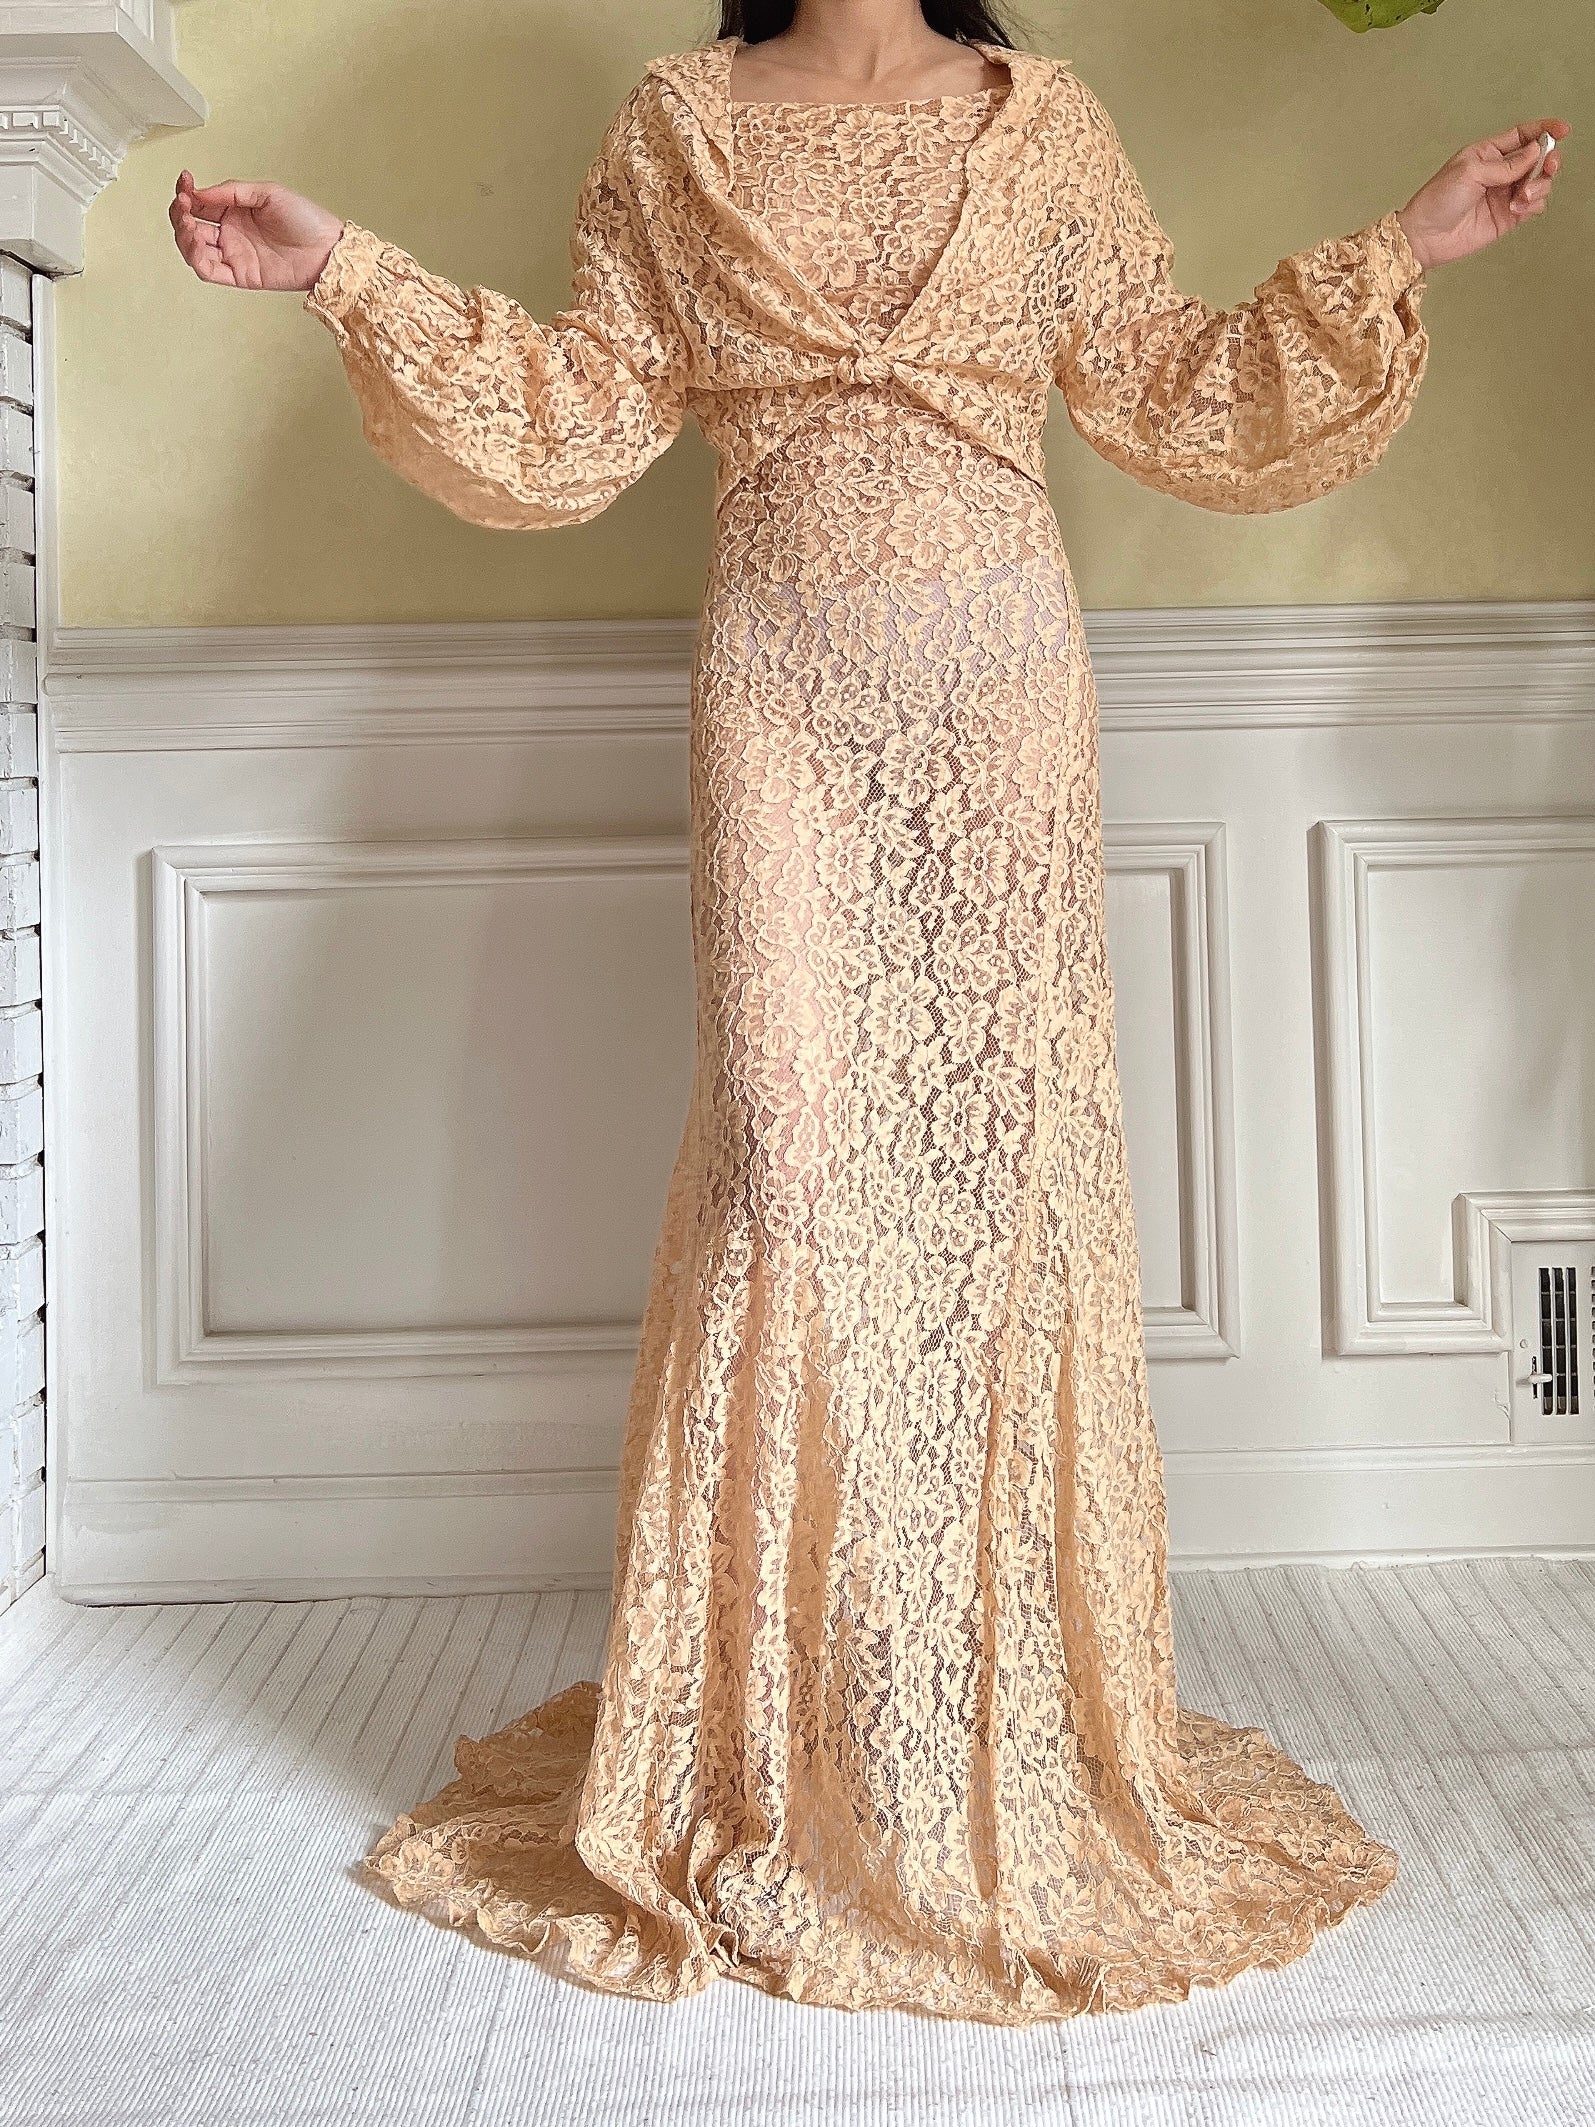 1930s Peach Lace Gown - S